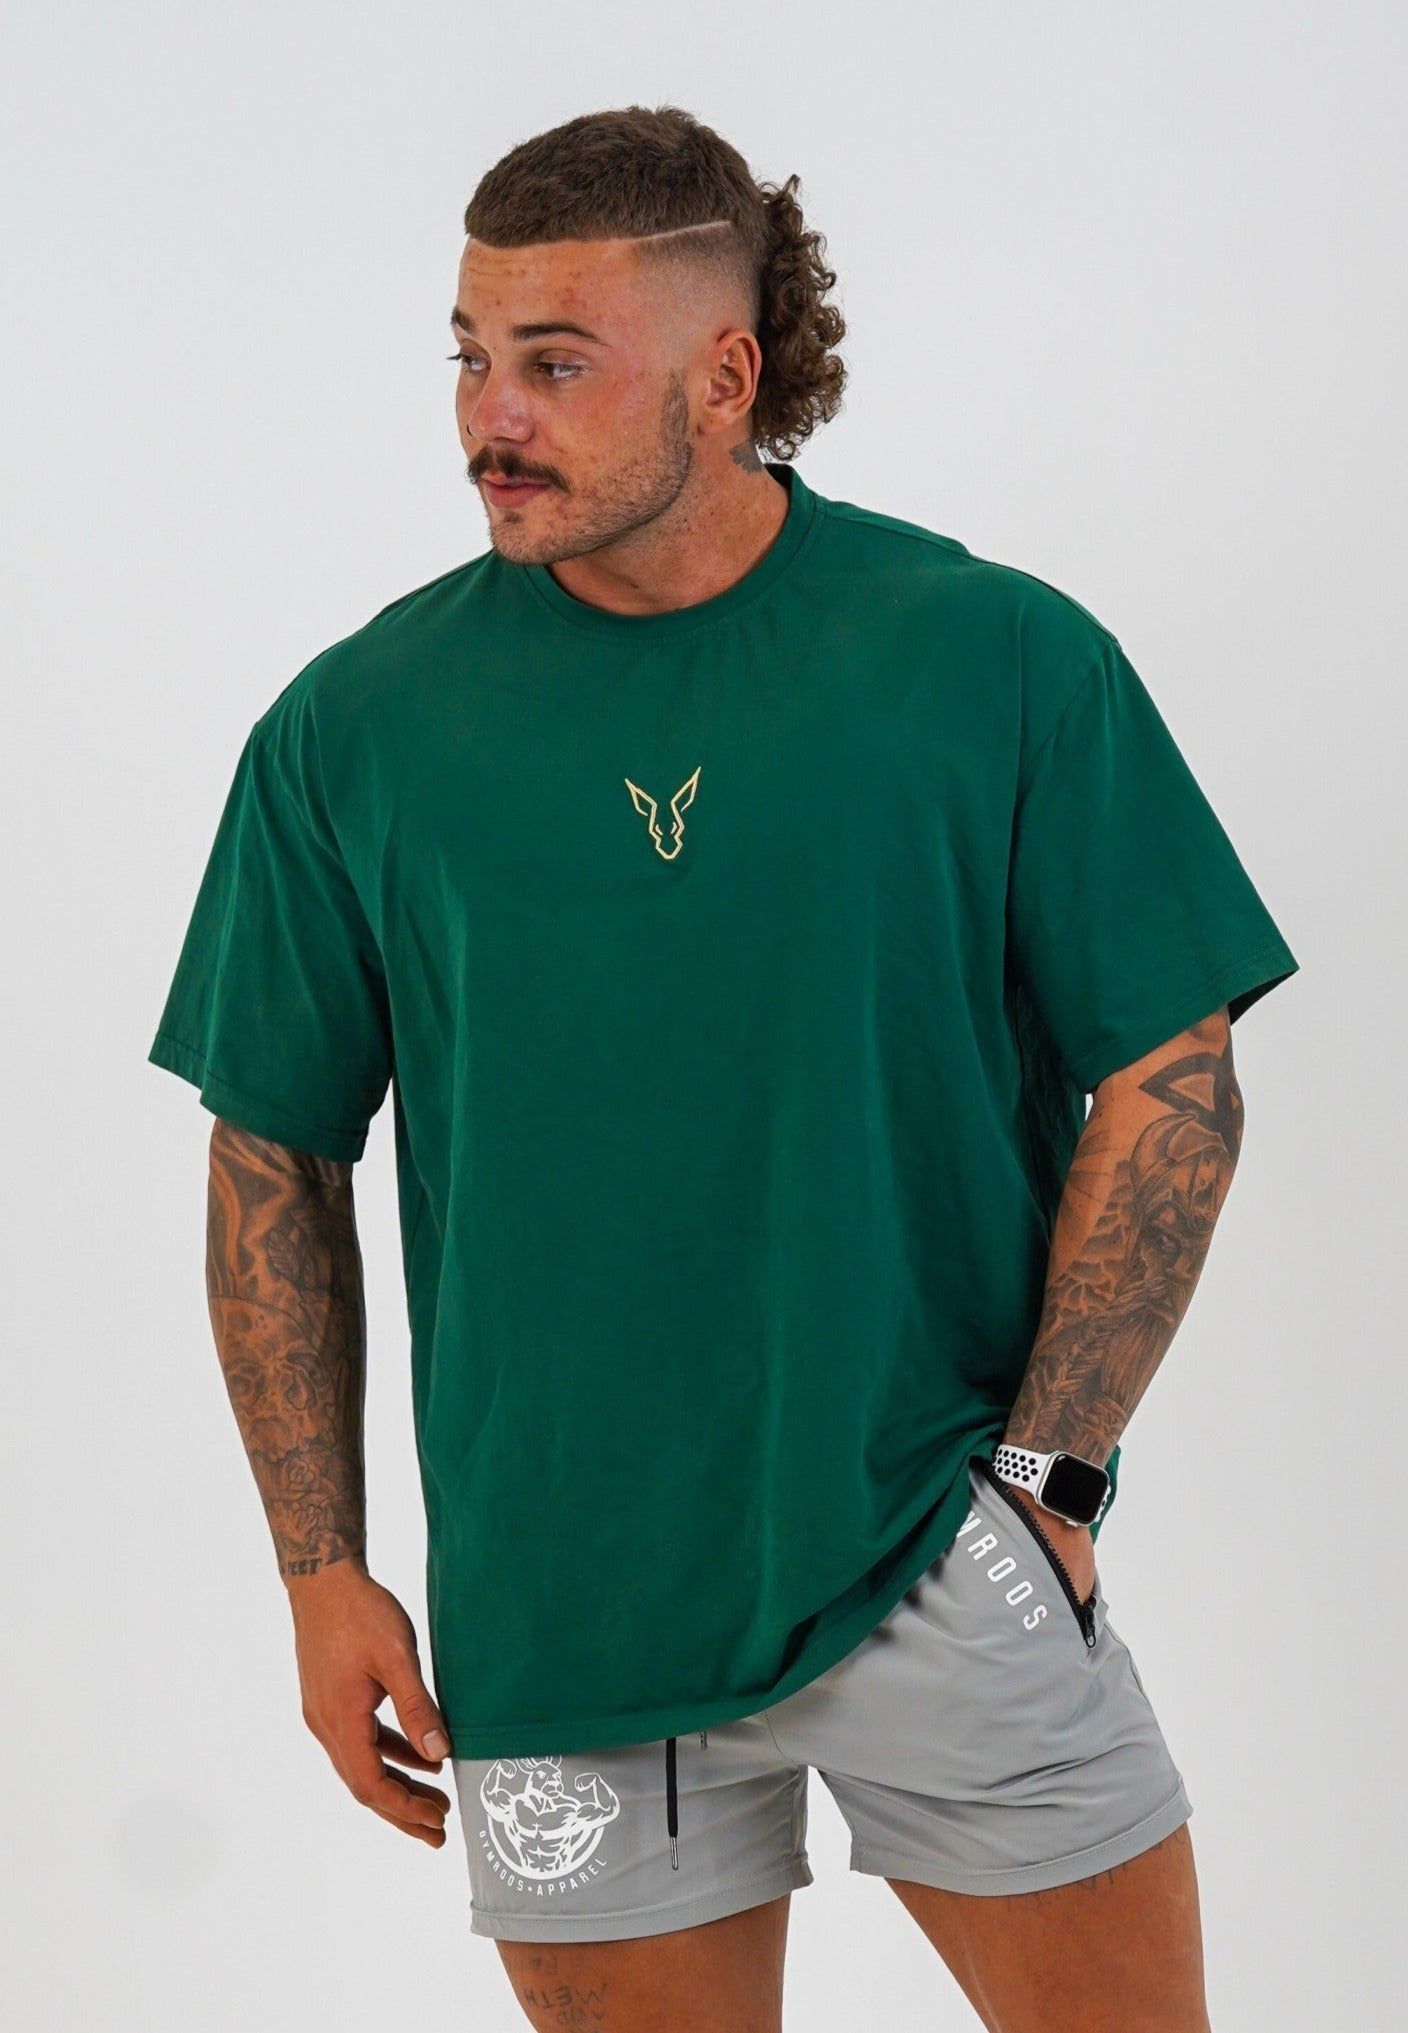 Erupt Oversized Tee - Green & Gold - GYMROOS